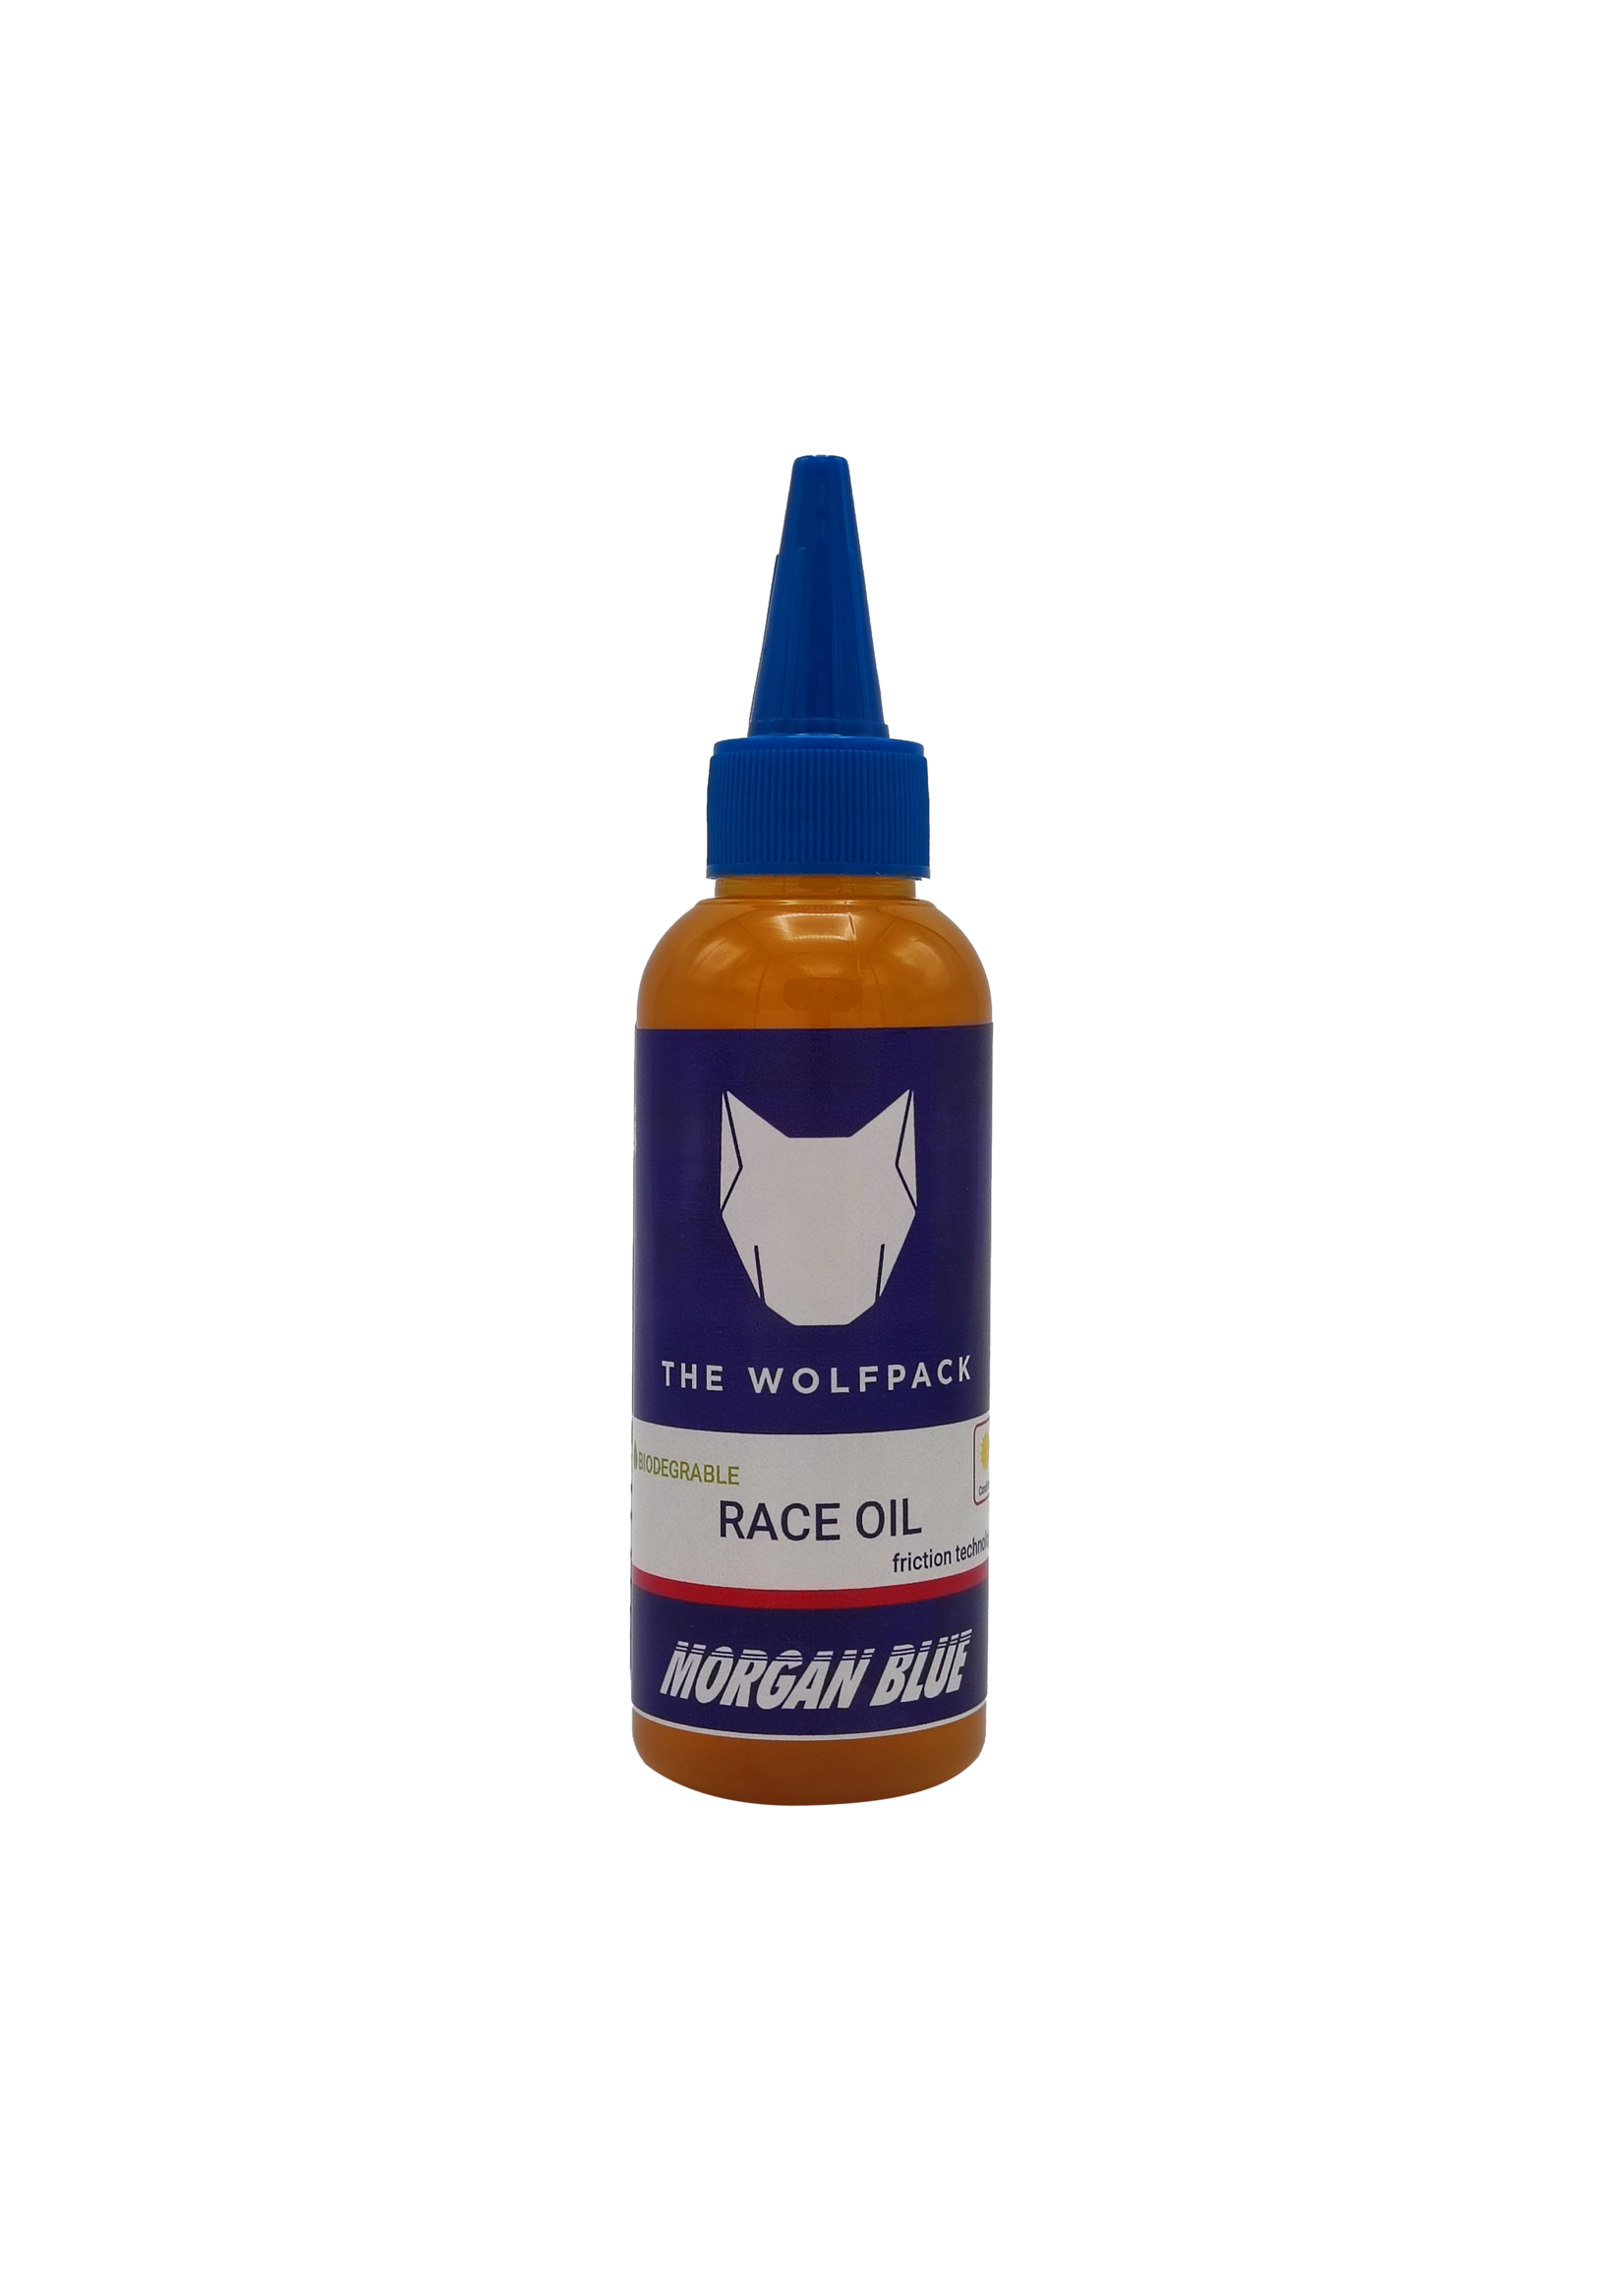 The Wolfpack RACE OIL